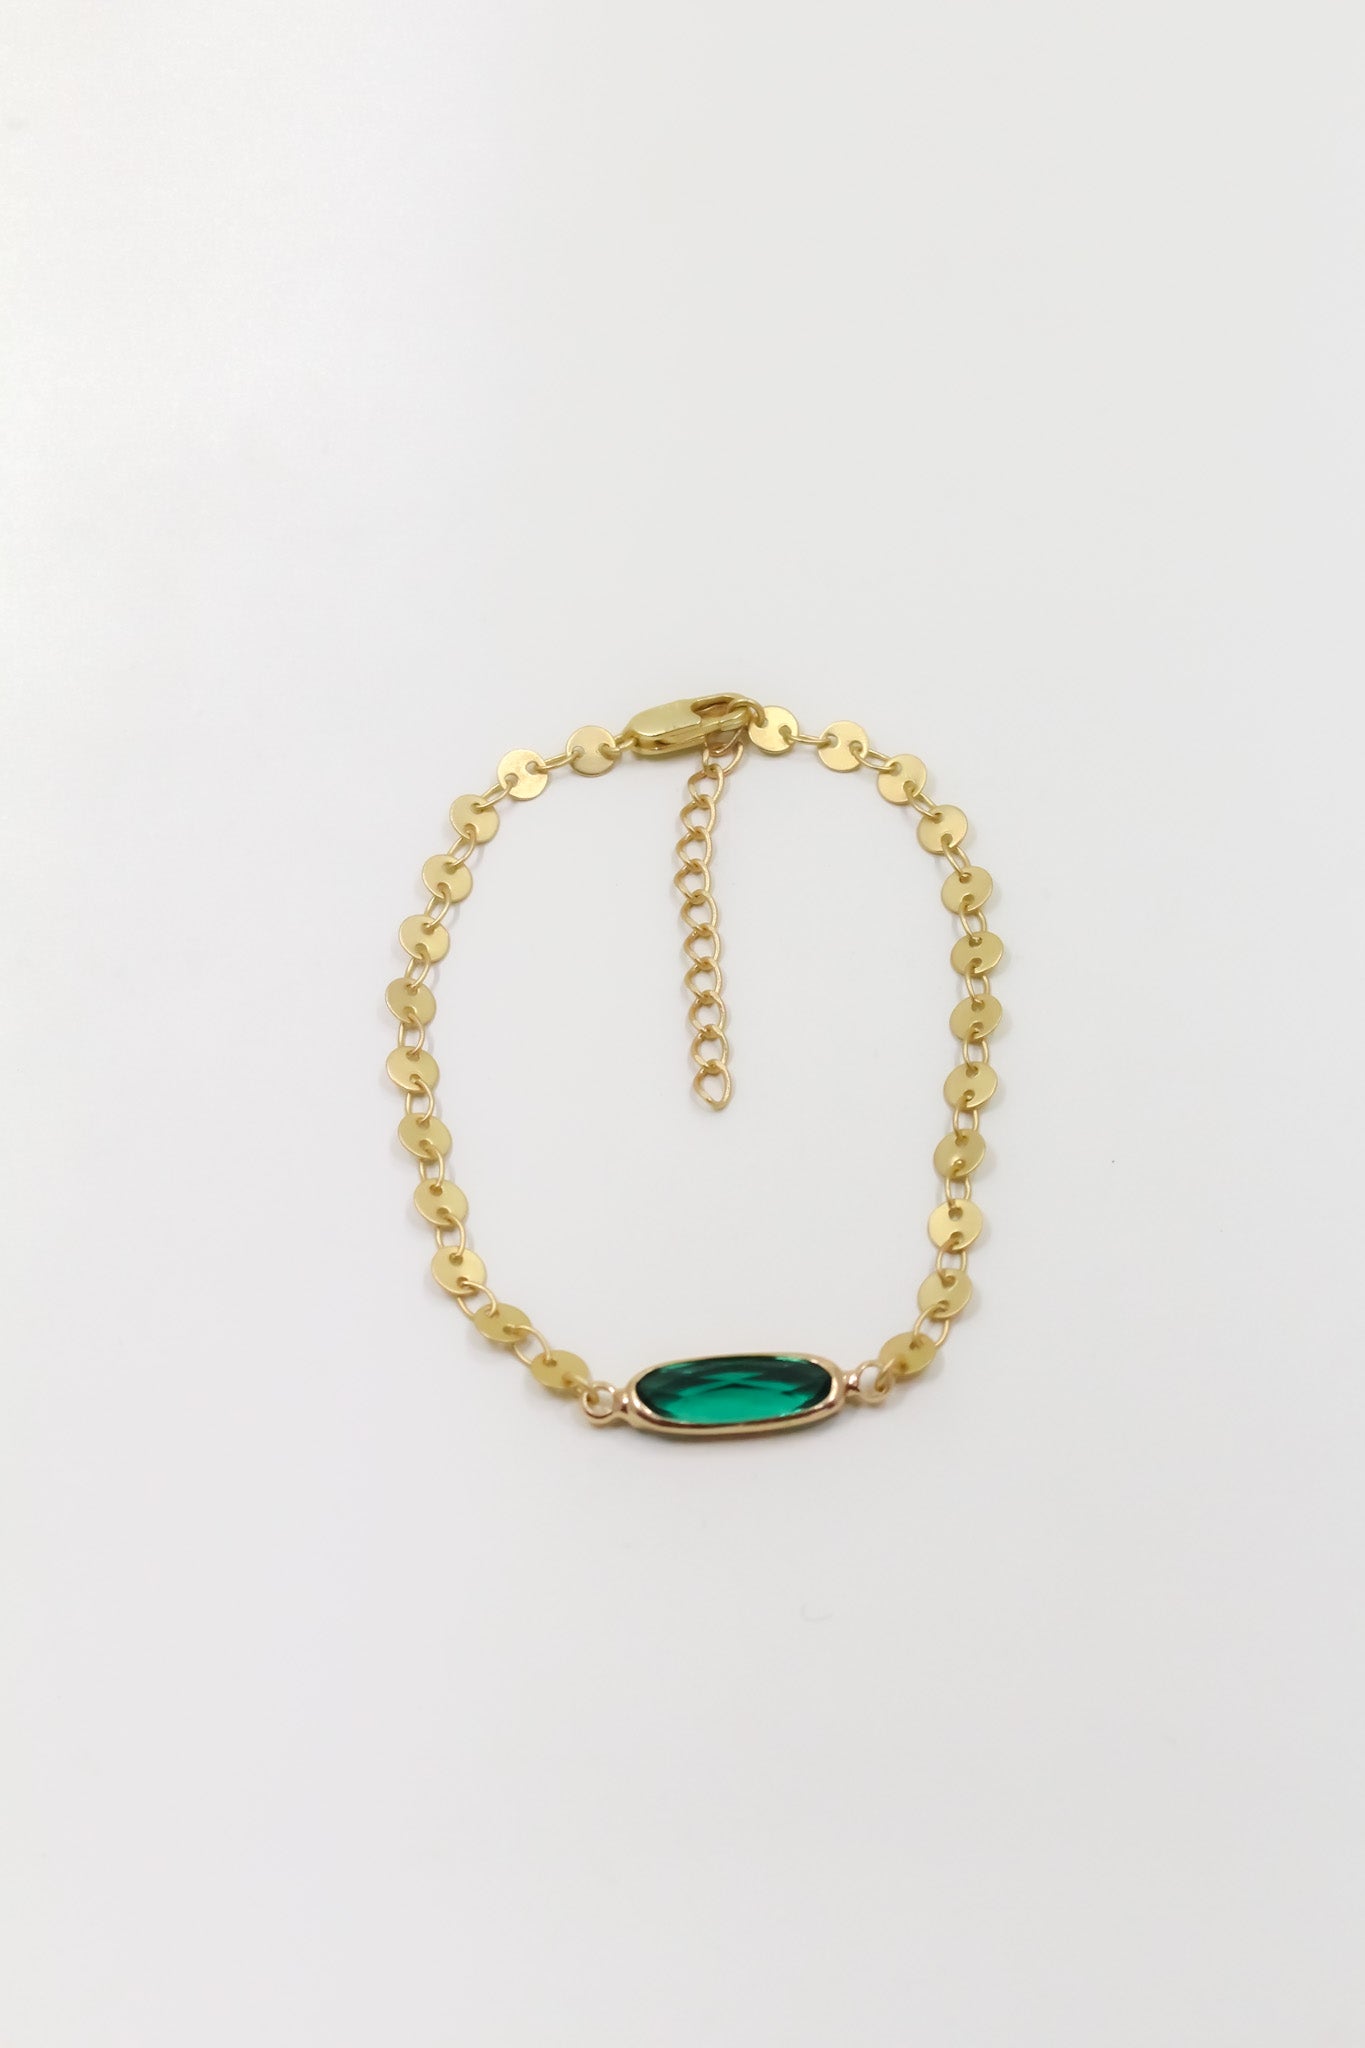 Oval Sea Green Bracelet with Coin Chain